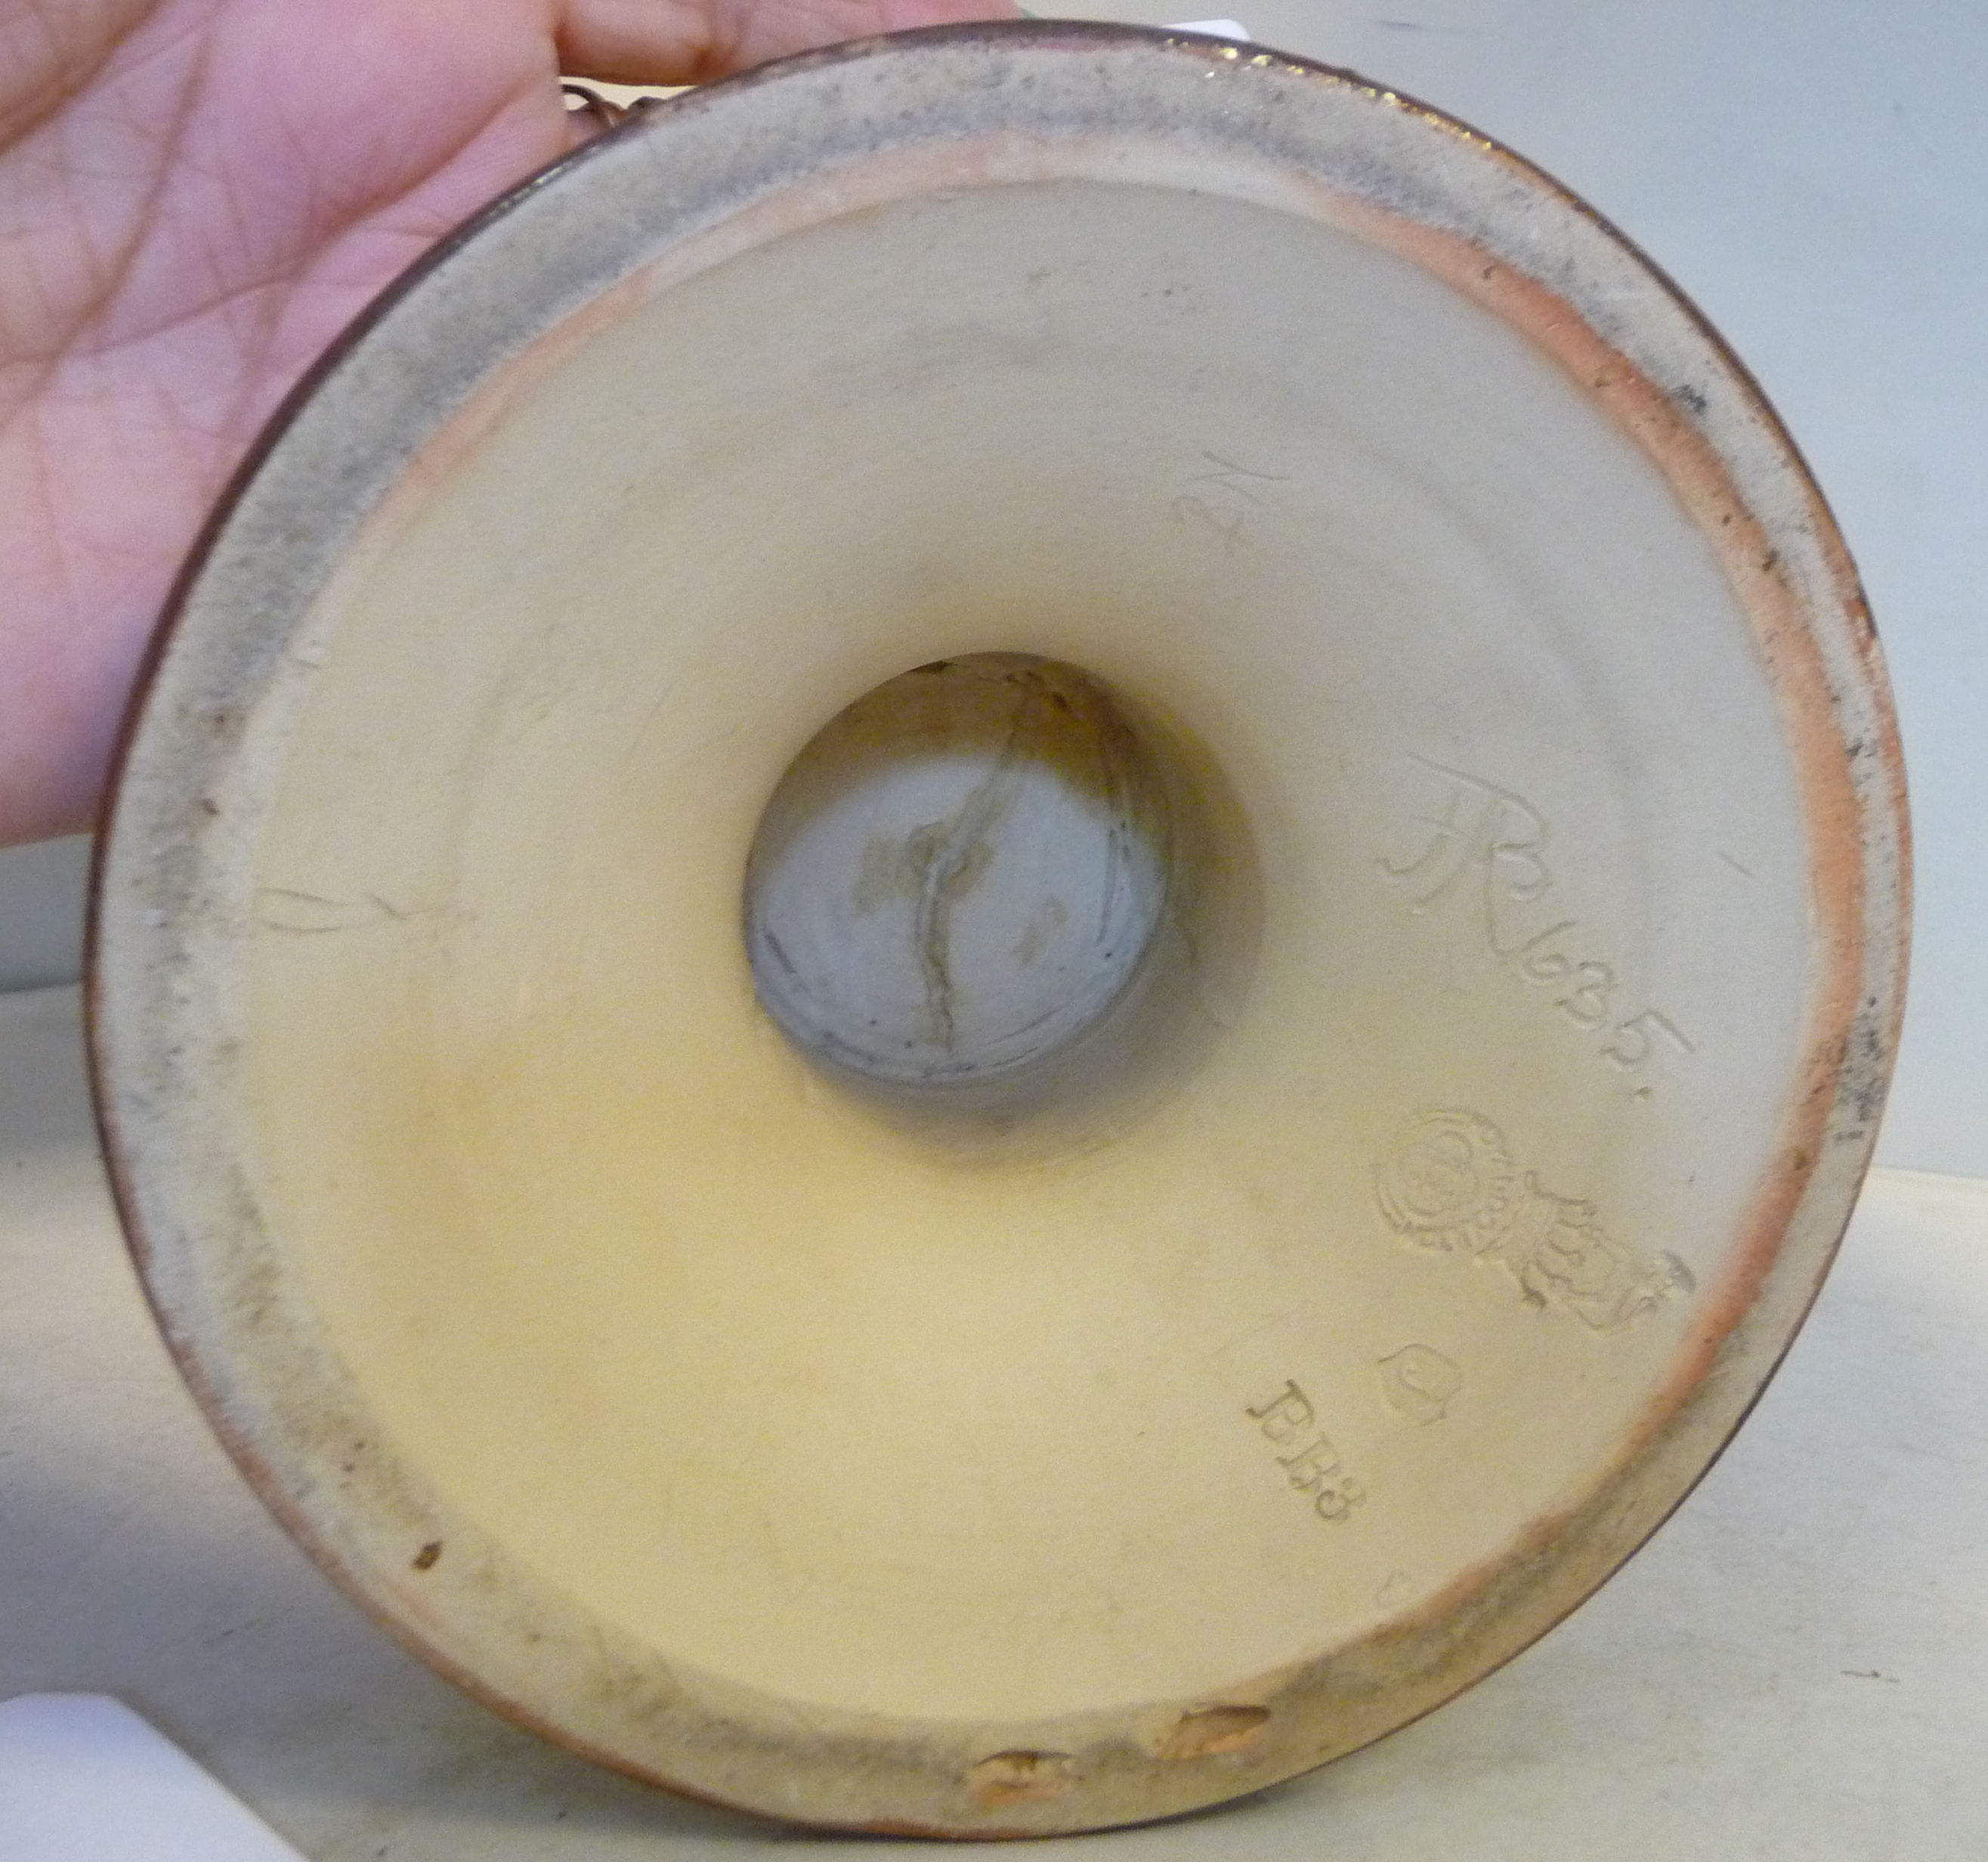 A Royal Doulton stoneware vase of shouldered, ovoid form with a narrow neck and flared rim, - Image 8 of 10